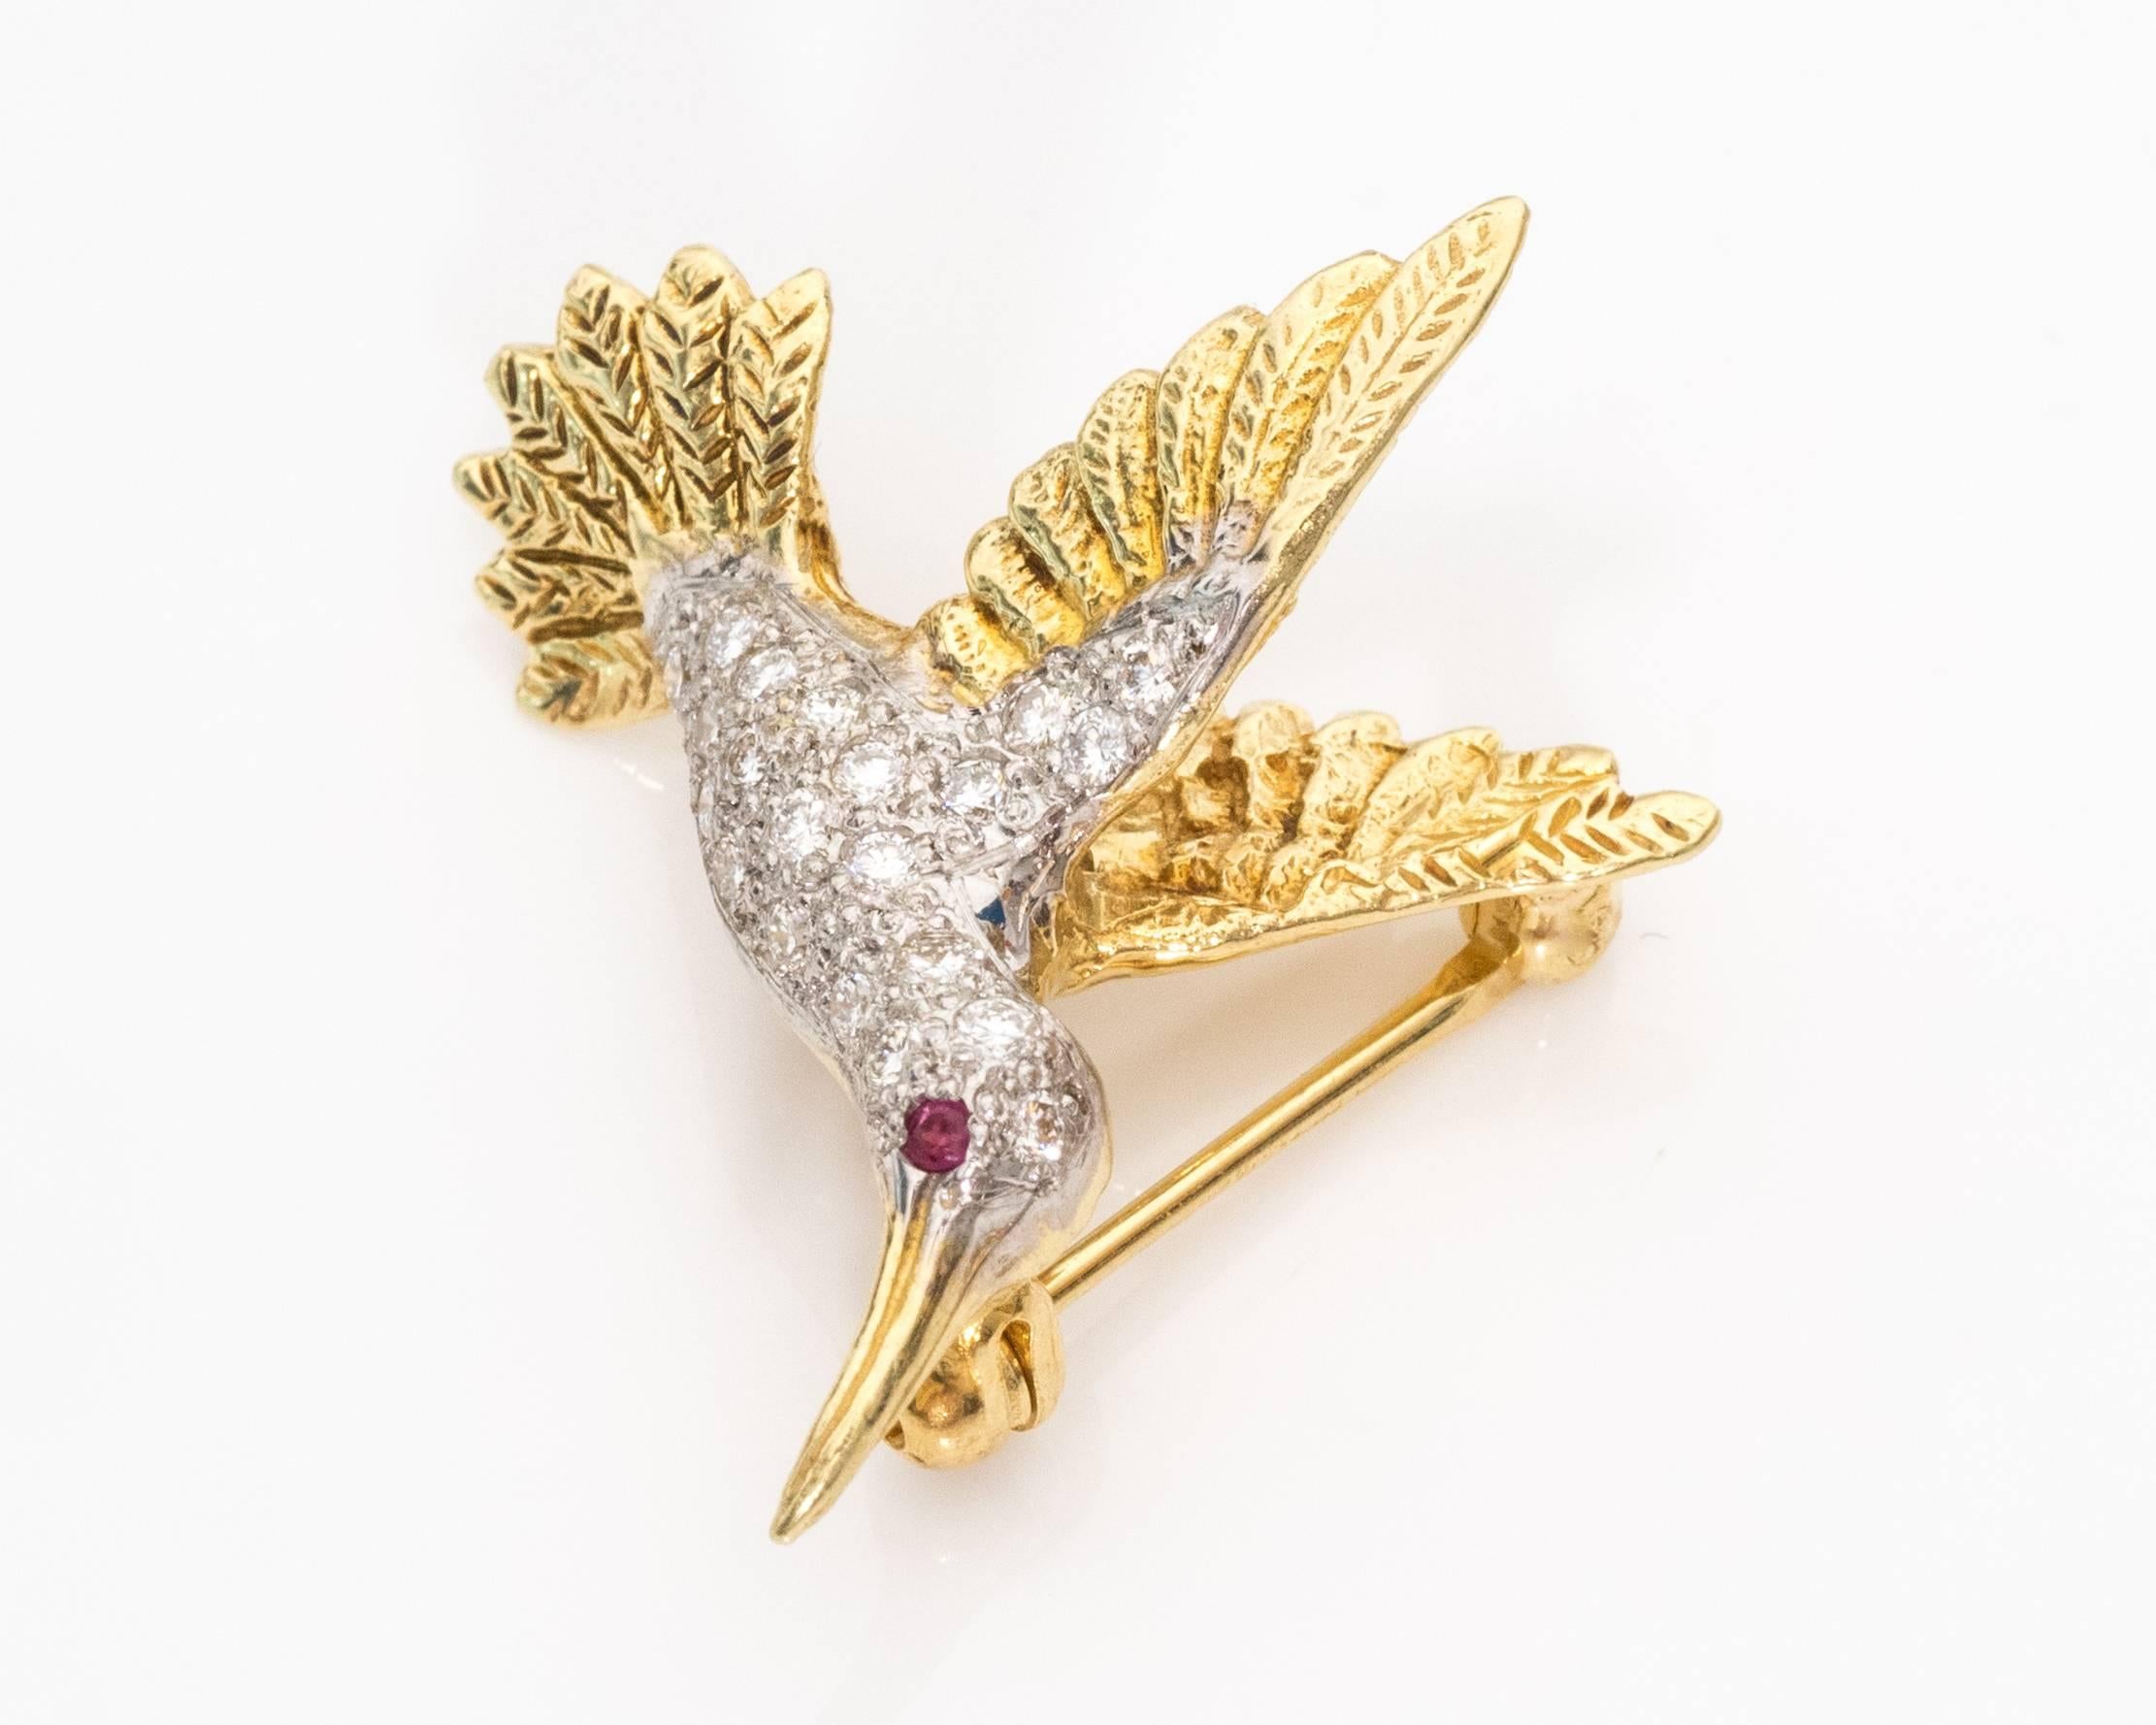 1980s Vintage Hummingbird Brooch features 18K Yellow Gold, .20 carats of diamonds and .01 carat Ruby. The bird is covered in diamonds and has a Ruby eye. The 18K gold wings and tail have a detailed feather texture. The gold beak is smooth with a